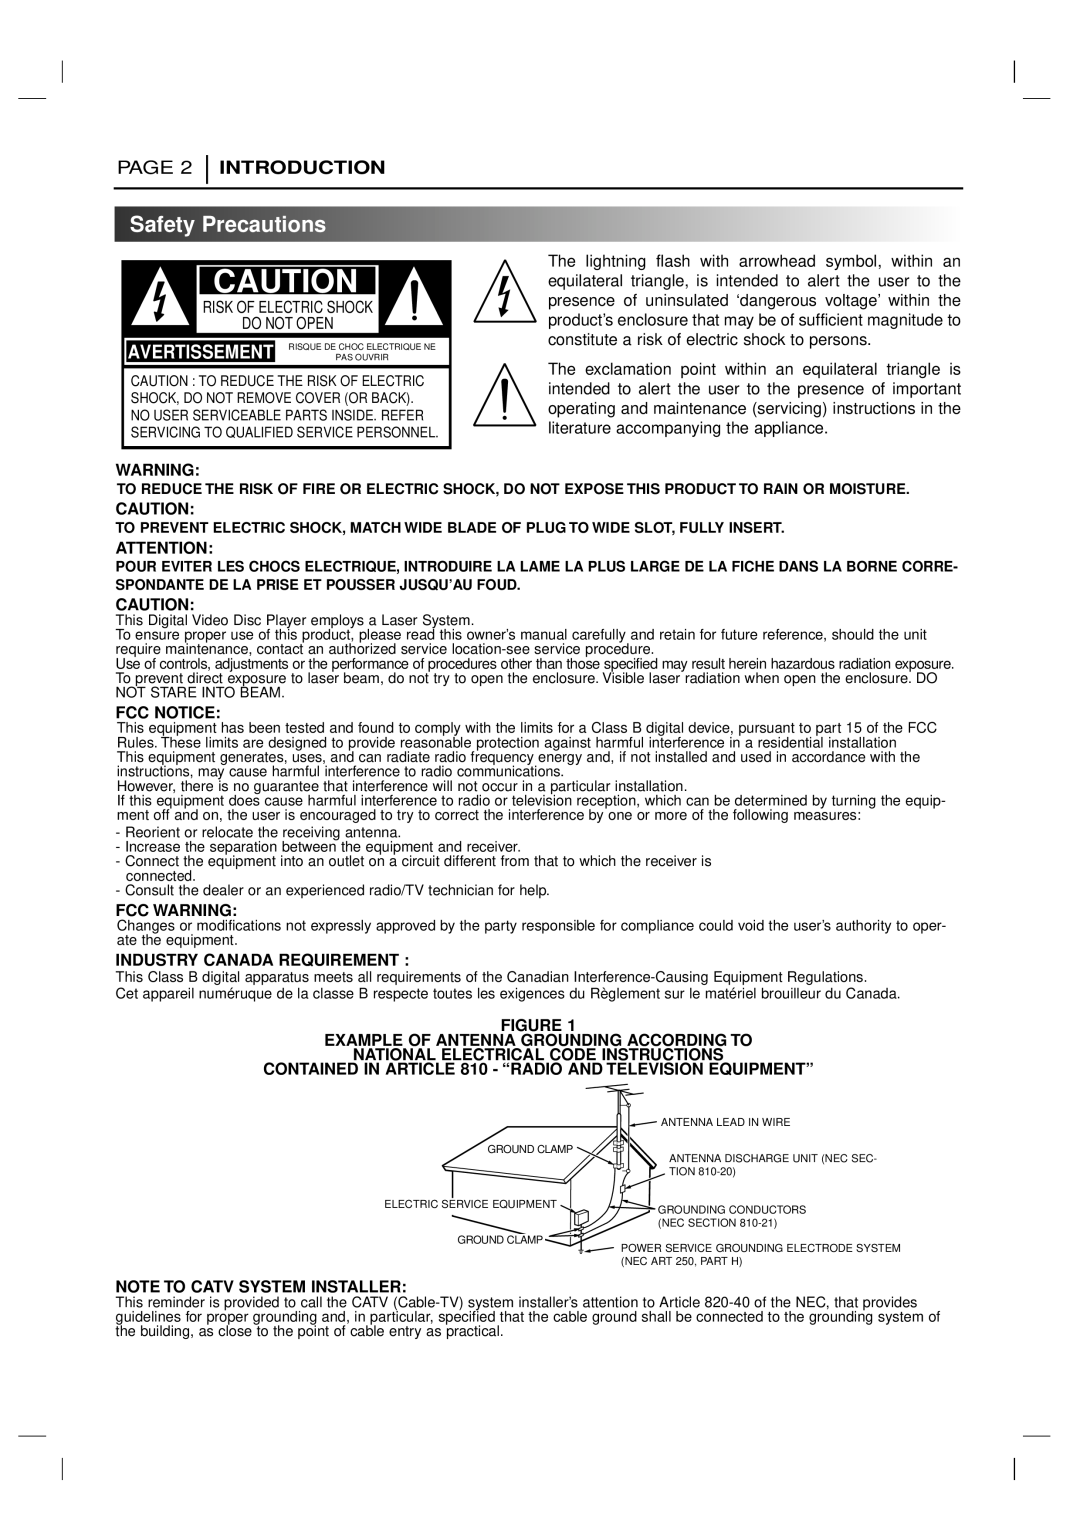 Marantz VC5200 SafetyPrecautions, Page, Introduction, Avertissement, Fcc Notice, Fcc Warning, Industry Canada Requirement 